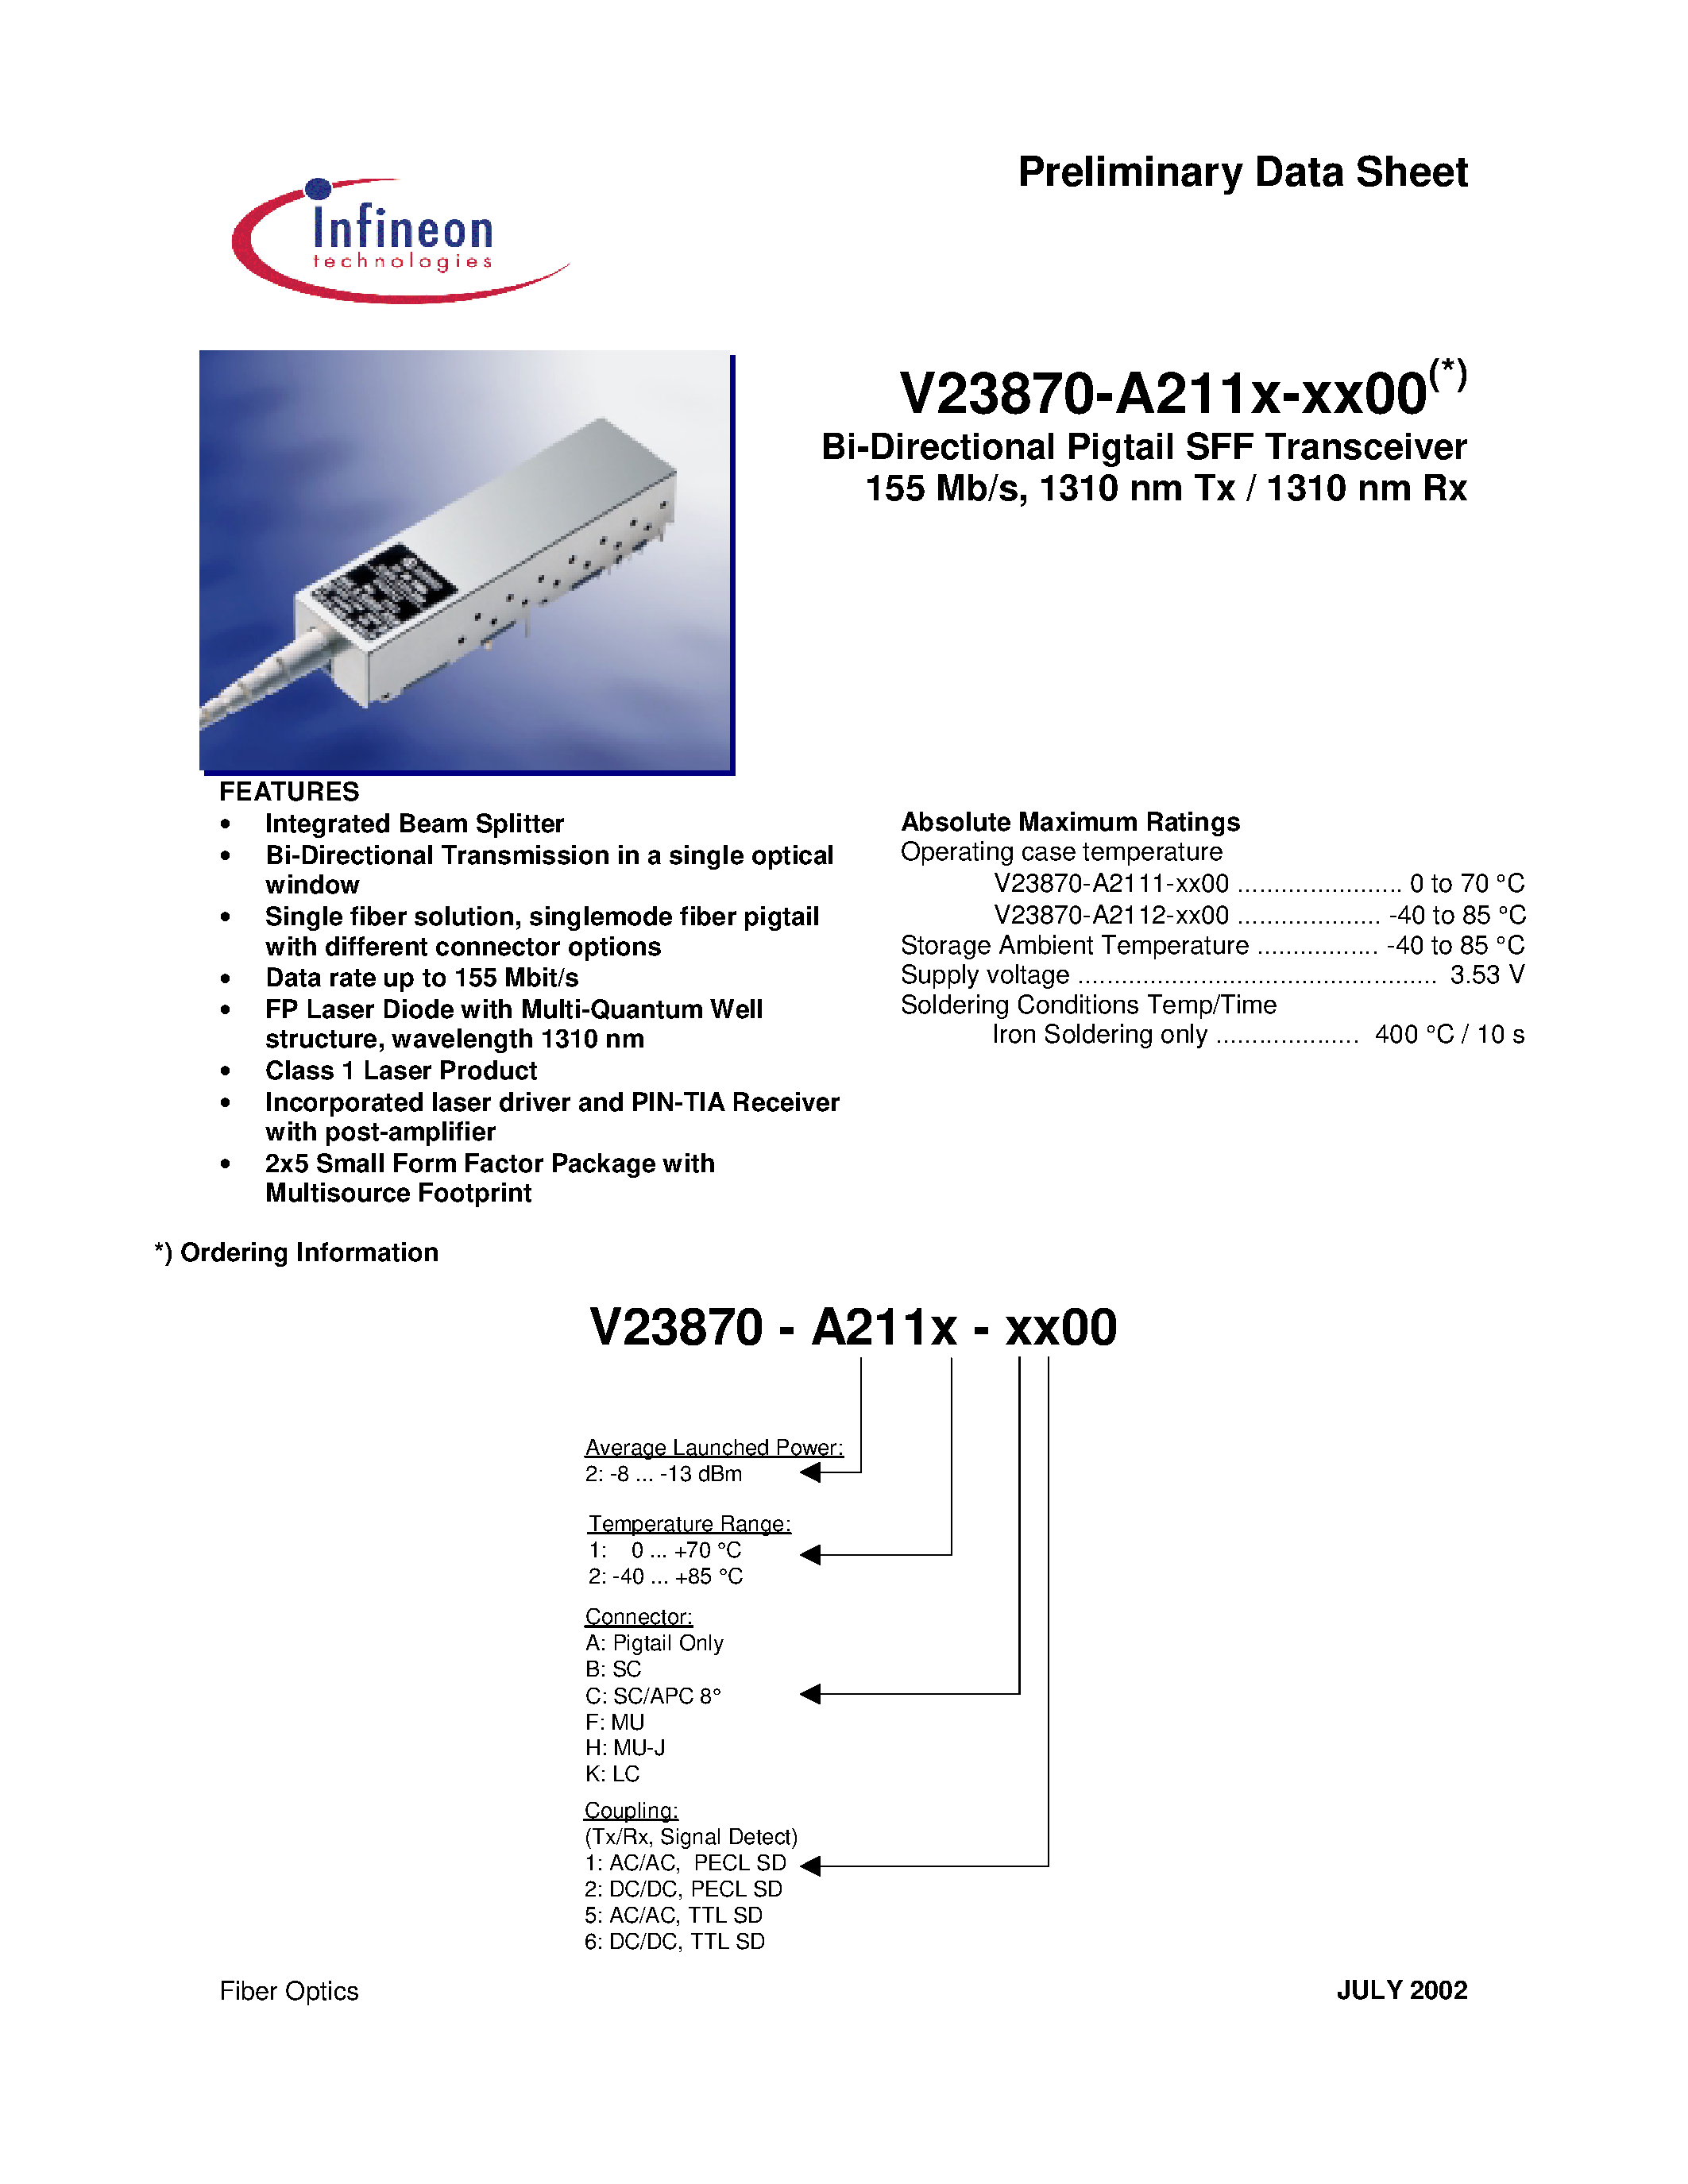 Datasheet V23870-A2111-C100 - Bi-Directional Pigtail SFF Transceiver 155 Mb/s/ 1310 nm Tx / 1310 nm Rx page 1